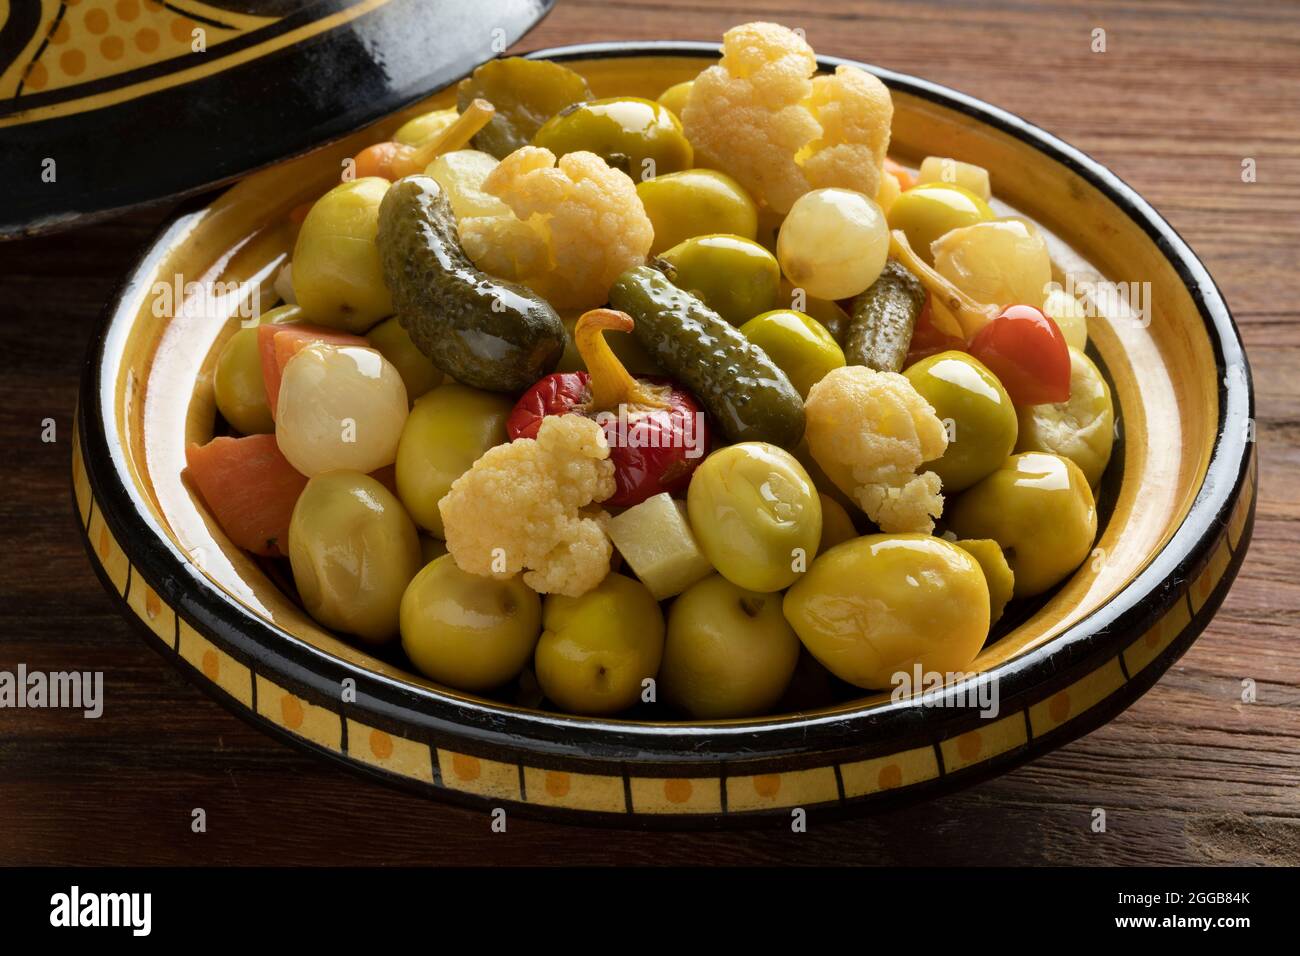 Traditional bowl with green olives and vegetables for a snack, appetizer or side dish Stock Photo